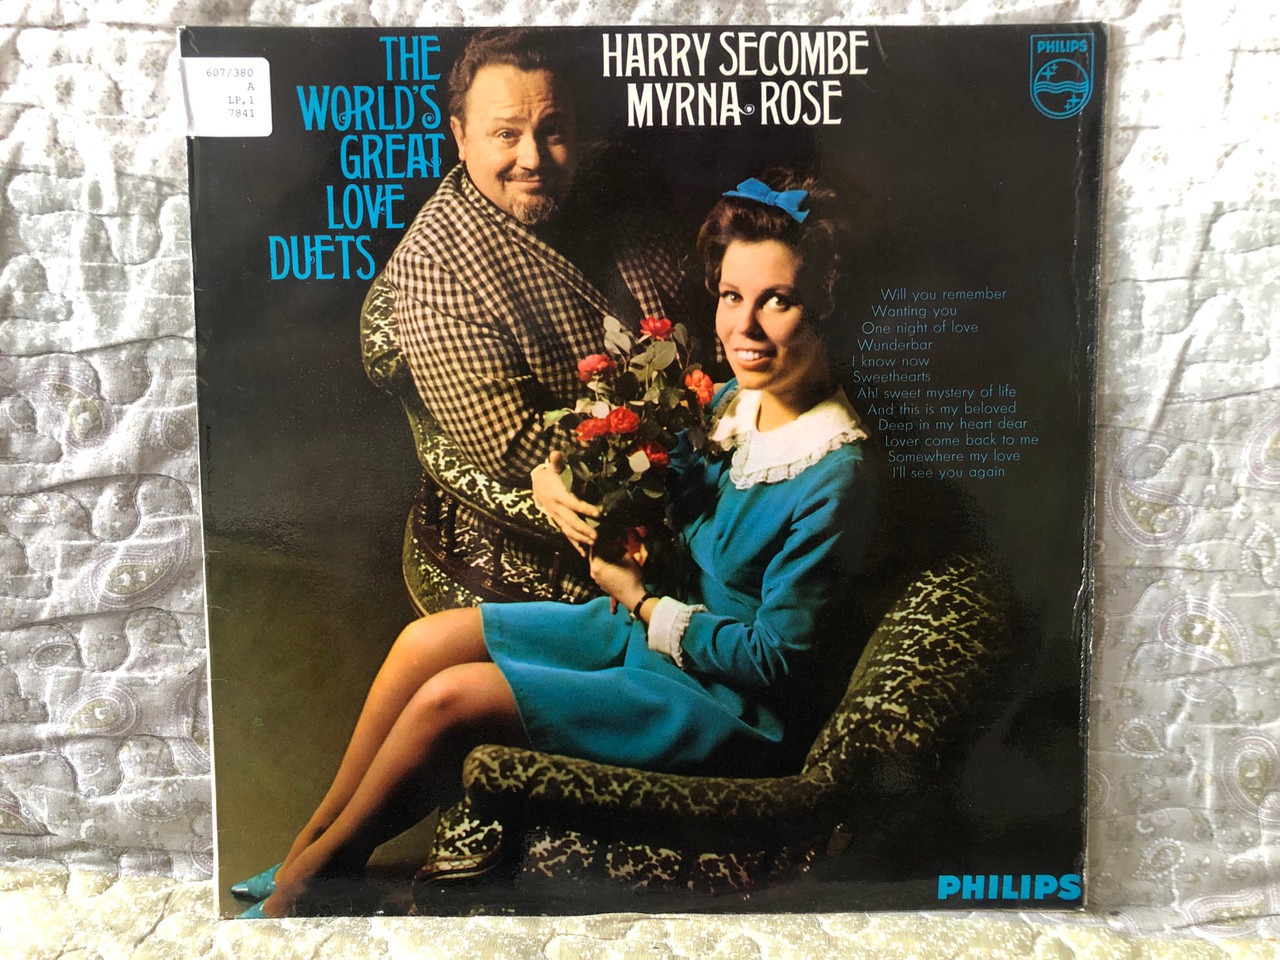 https://cdn10.bigcommerce.com/s-62bdpkt7pb/products/0/images/274965/Harry_Secombe_Myrna_Rose_The_Worlds_Greatest_Love_Duets_Will_you_Remember_Wanting_You_One_Night_Of_Love_Wunderbar_I_Know_Now_Sweethearts_Ah_Sweet_Mystery_Of_Life_And_This_Is_My_Beloved_Phili_1__38580.1684399288.1280.1280.JPG?c=2&_gl=1*phj91t*_ga*MjA2NTIxMjE2MC4xNTkwNTEyNTMy*_ga_WS2VZYPC6G*MTY4NDM4ODk3My45MDAuMS4xNjg0Mzk5MDU1LjU3LjAuMA..